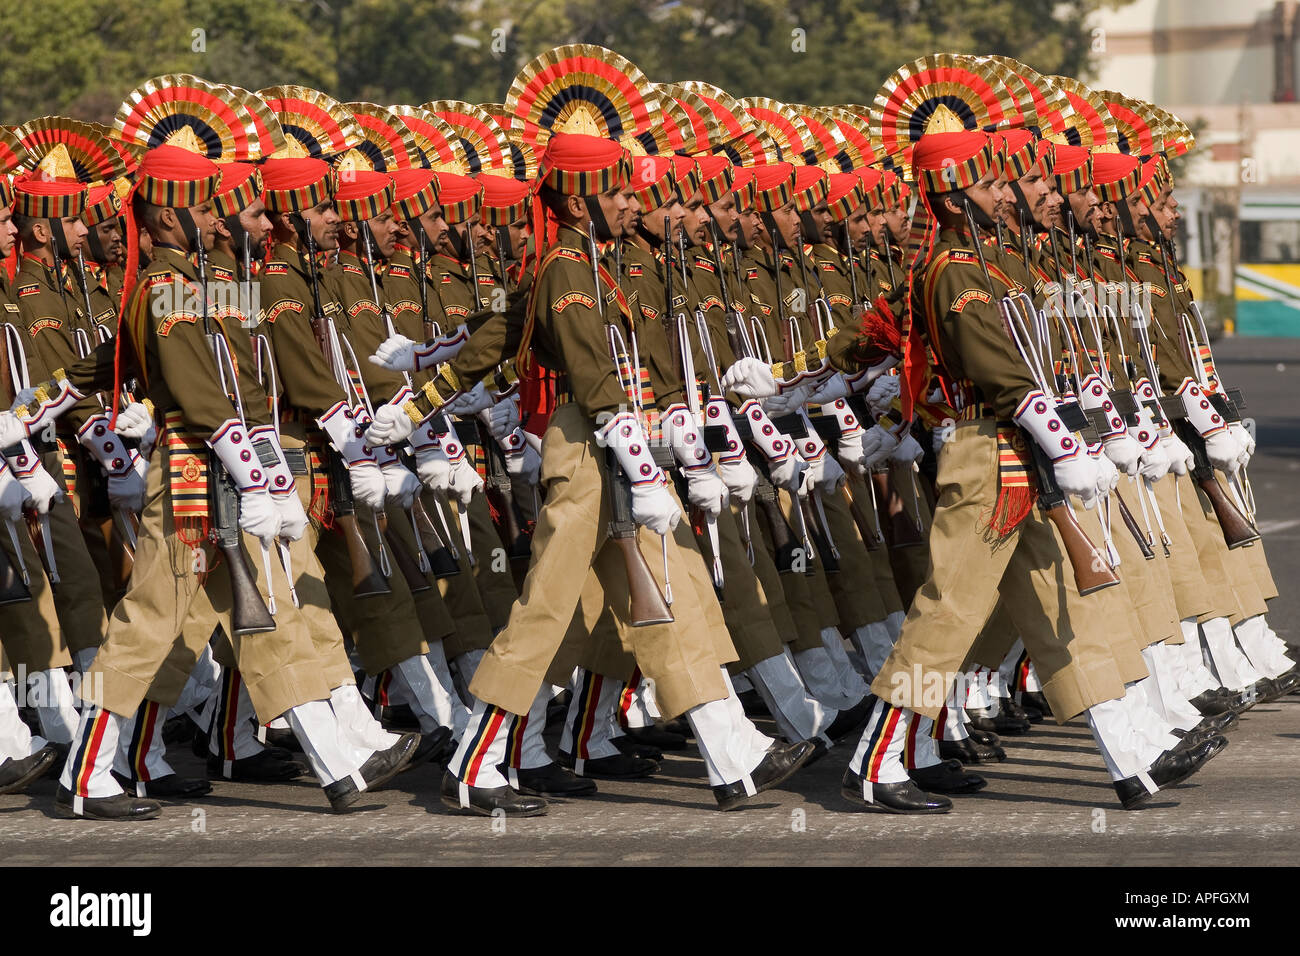 soldiers-of-the-indian-army-marching-down-the-raj-path-in-preparation-APFGXM.jpg